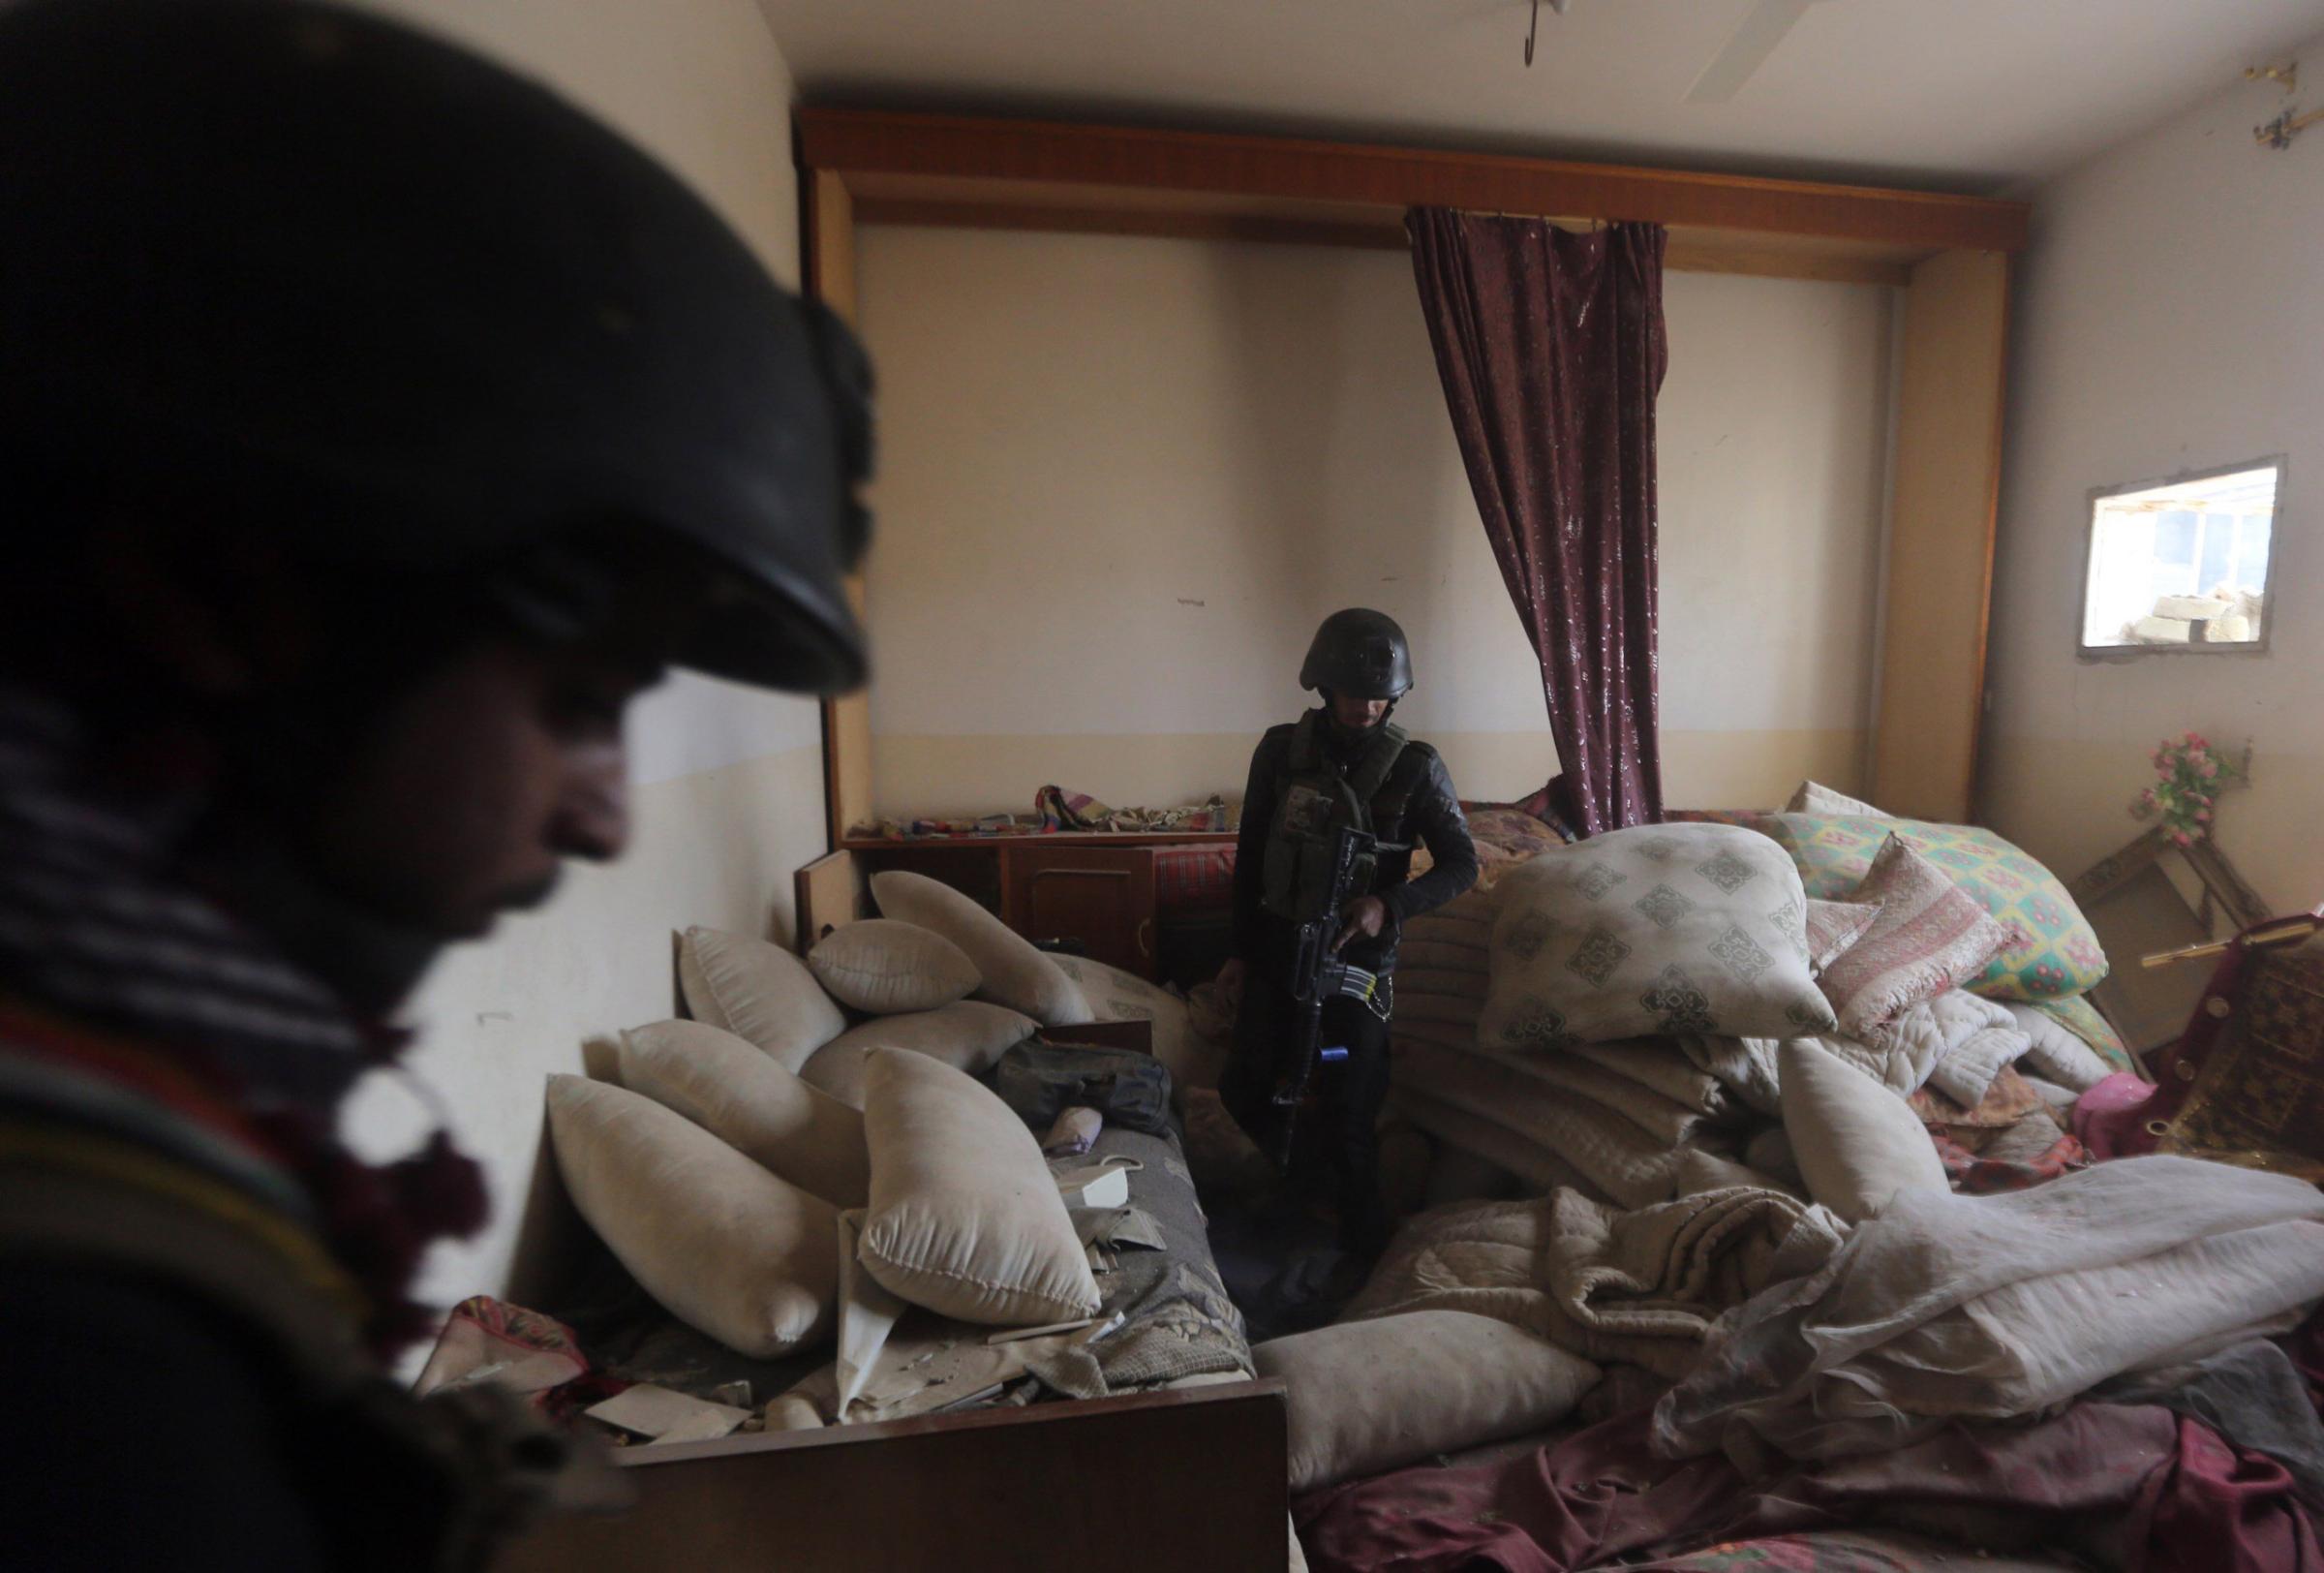 Members of Iraq's elite counter-terrorism service search a building on December 27, 2015 in the Hoz neighbourhood in central Ramadi, the capital of Iraq's Anbar province, about 110 kilometers west of Baghdad, during military operations conducted by Iraqi pro-government forces against the Islamic State (IS) jihadist group. Jihadist fighters abandoned their last stronghold in Ramadi today, bringing Iraqi federal forces within sight of their biggest victory since last year's massive offensive by the Islamic State group. AFP PHOTO / AHMAD AL-RUBAYEAHMAD AL-RUBAYE/AFP/Getty Images